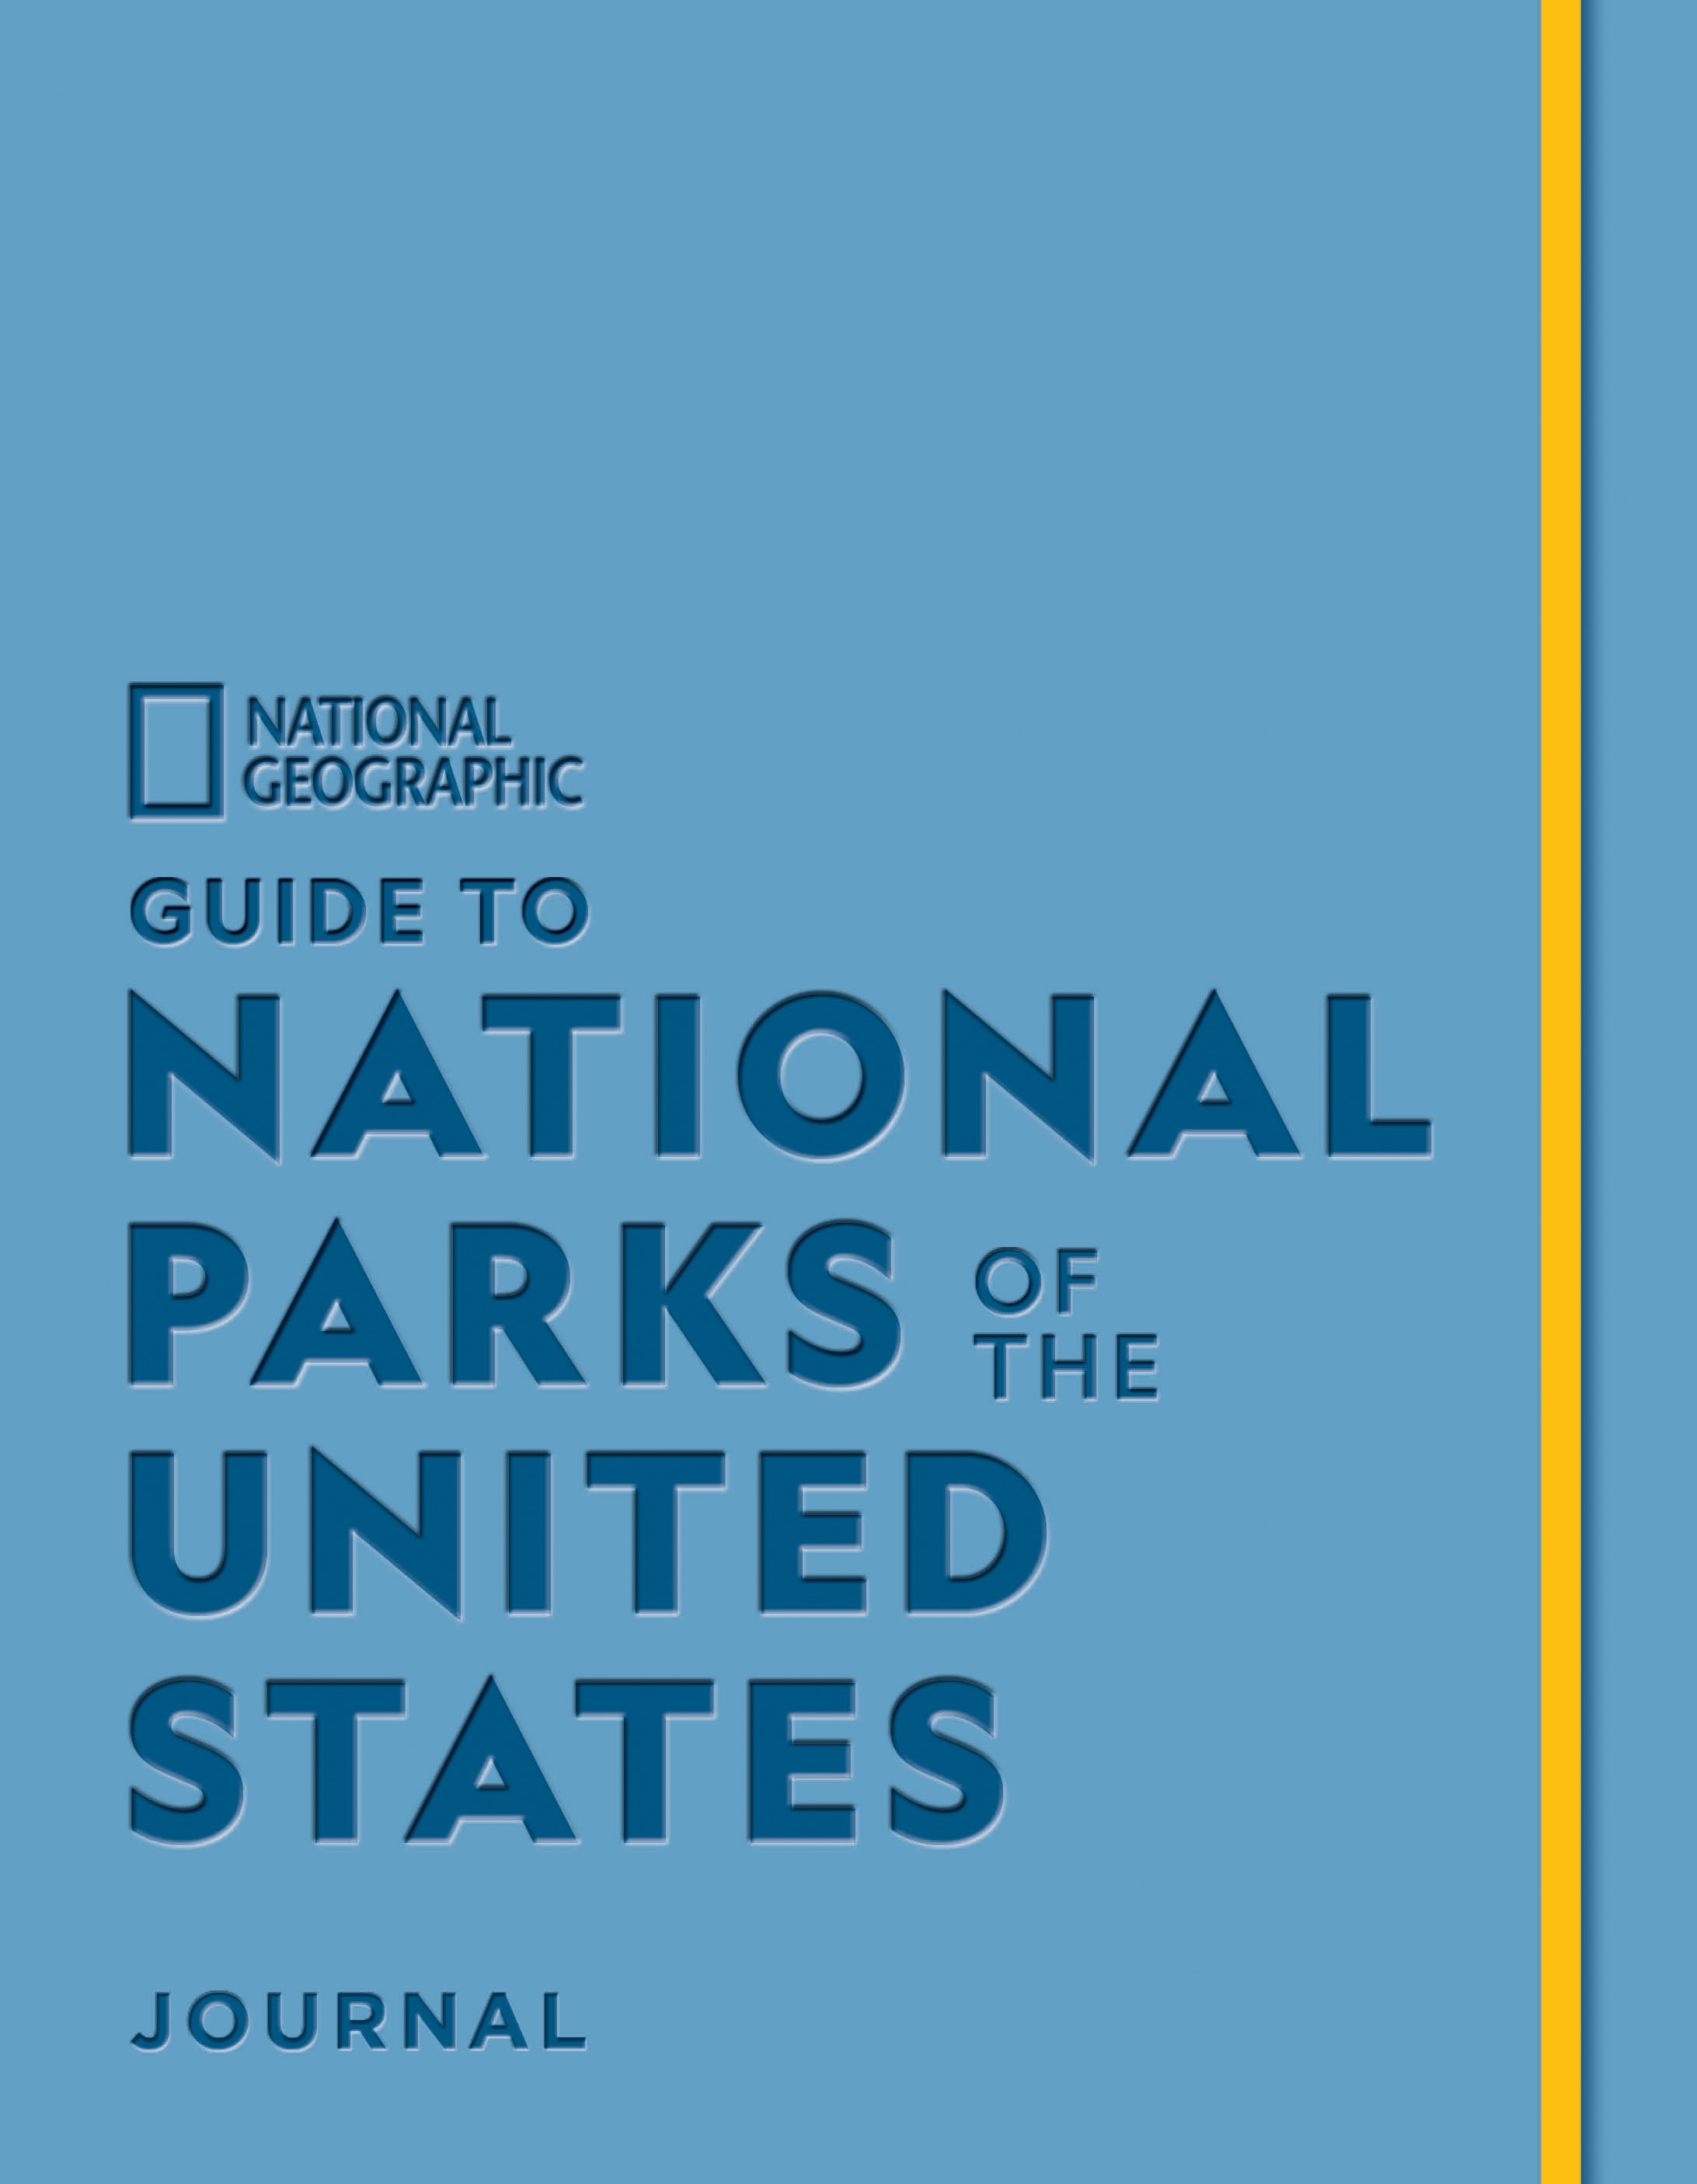 National Geographic Guide to National Parks of the United States Journal | 